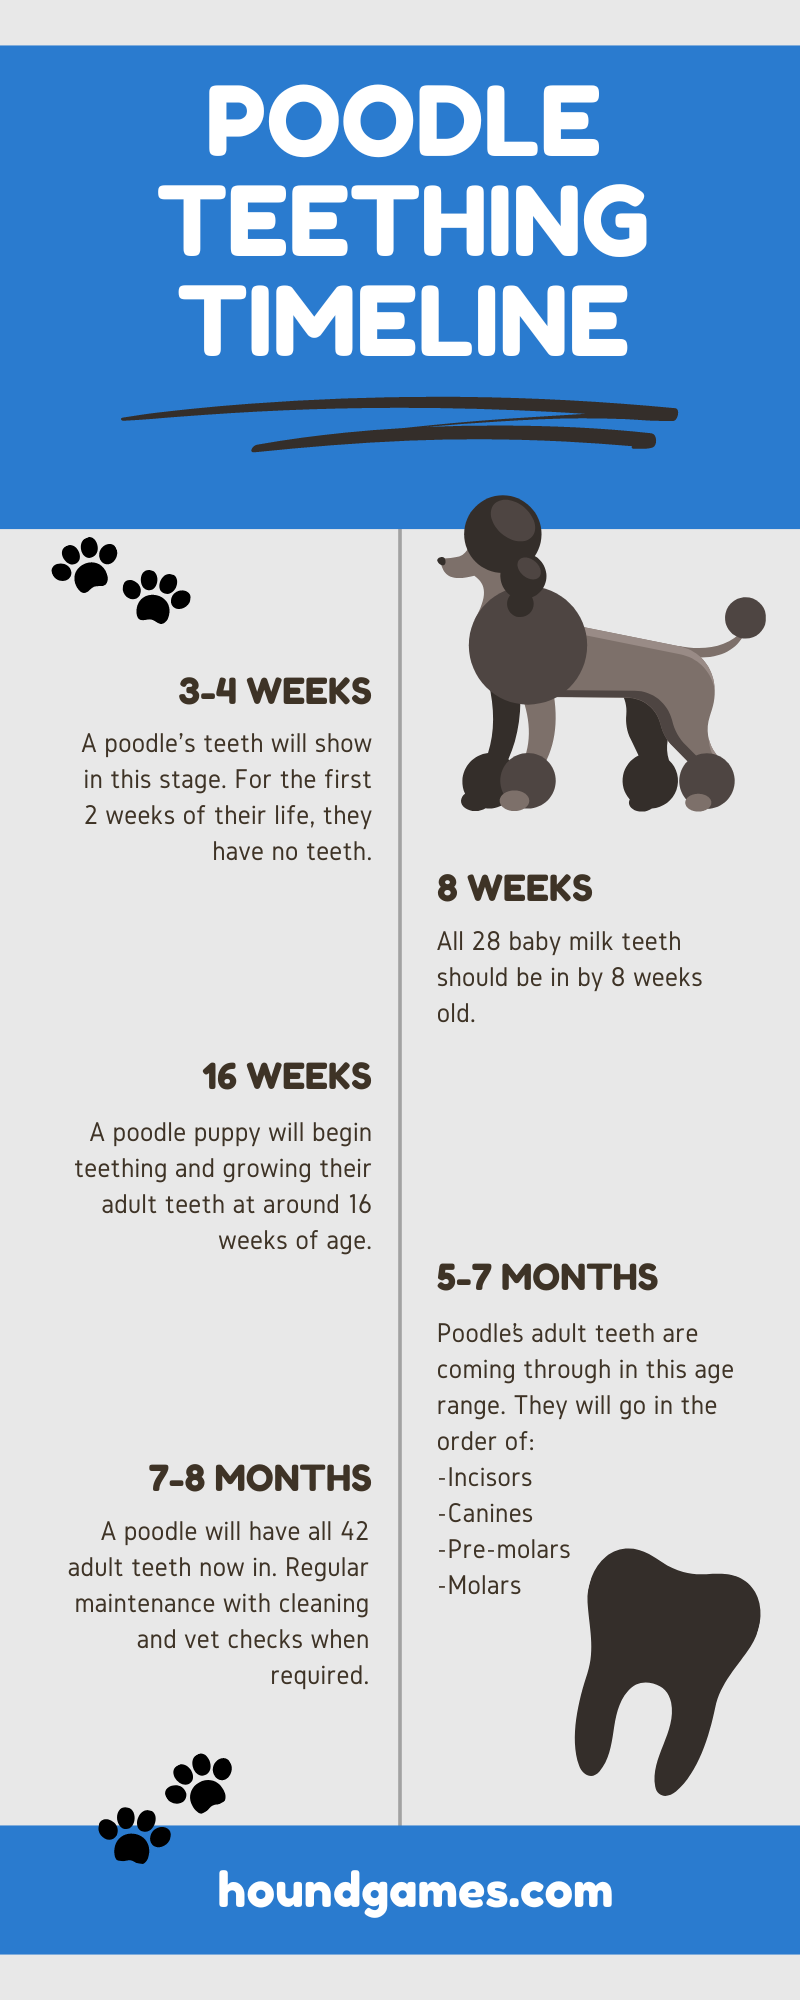 poodle teething timeline infographic